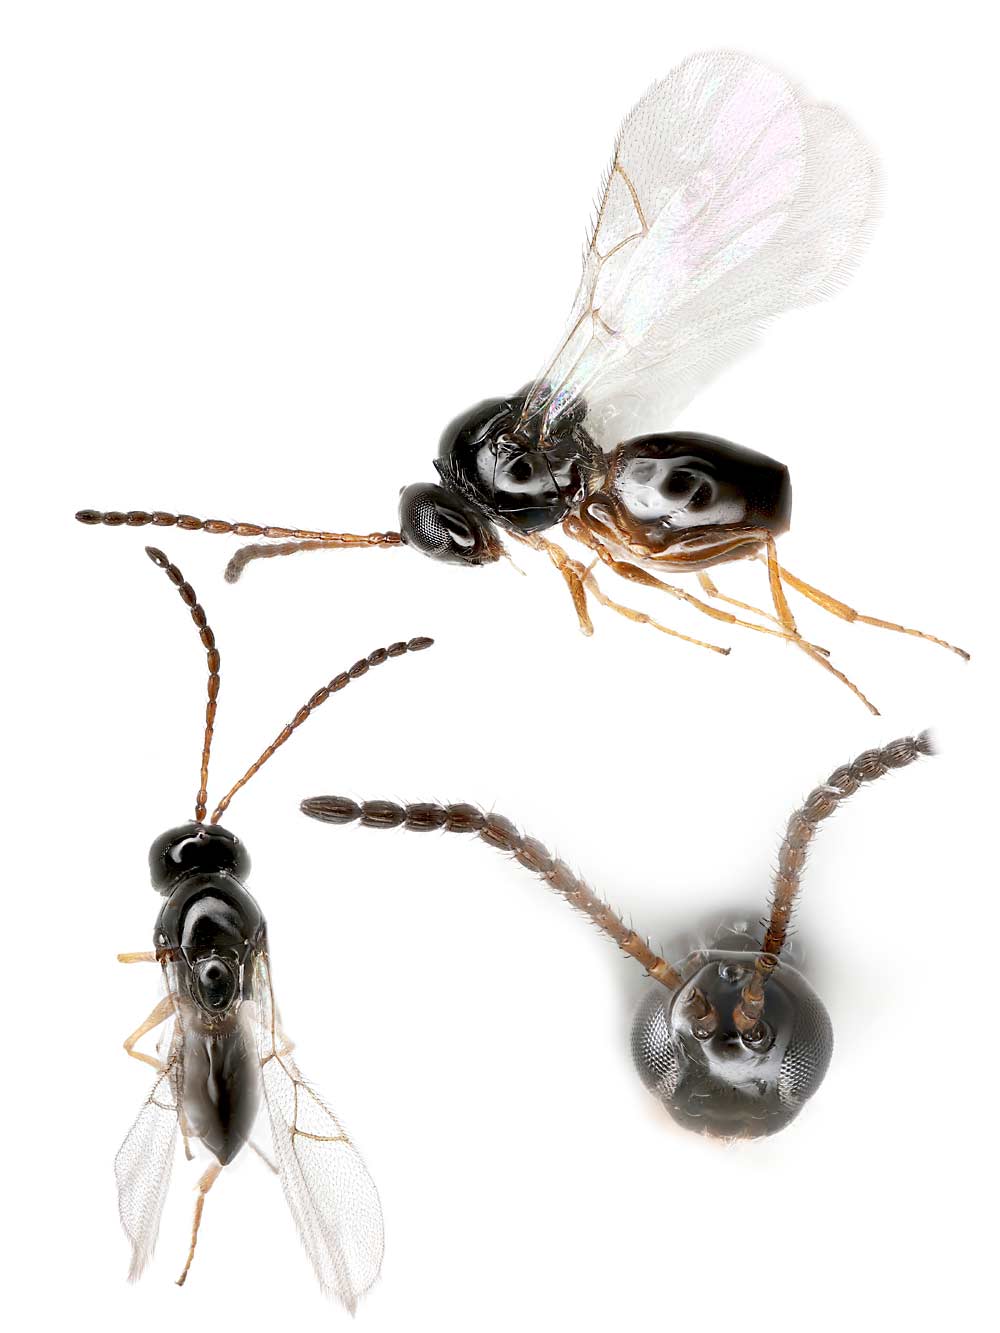 This photo illustrates for entomologists how to identify Ganaspis brasiliensis, a parasitoid wasp that targets spotted wing drosophila larvae. After a decade-long review, federal officials have approved Ganaspis for controlled releases to study how it may help control SWD, and scientists in Western Washington have recently detected it in the landscape as well. (Courtesy Silas Bossert/WSU Department of Entomology)